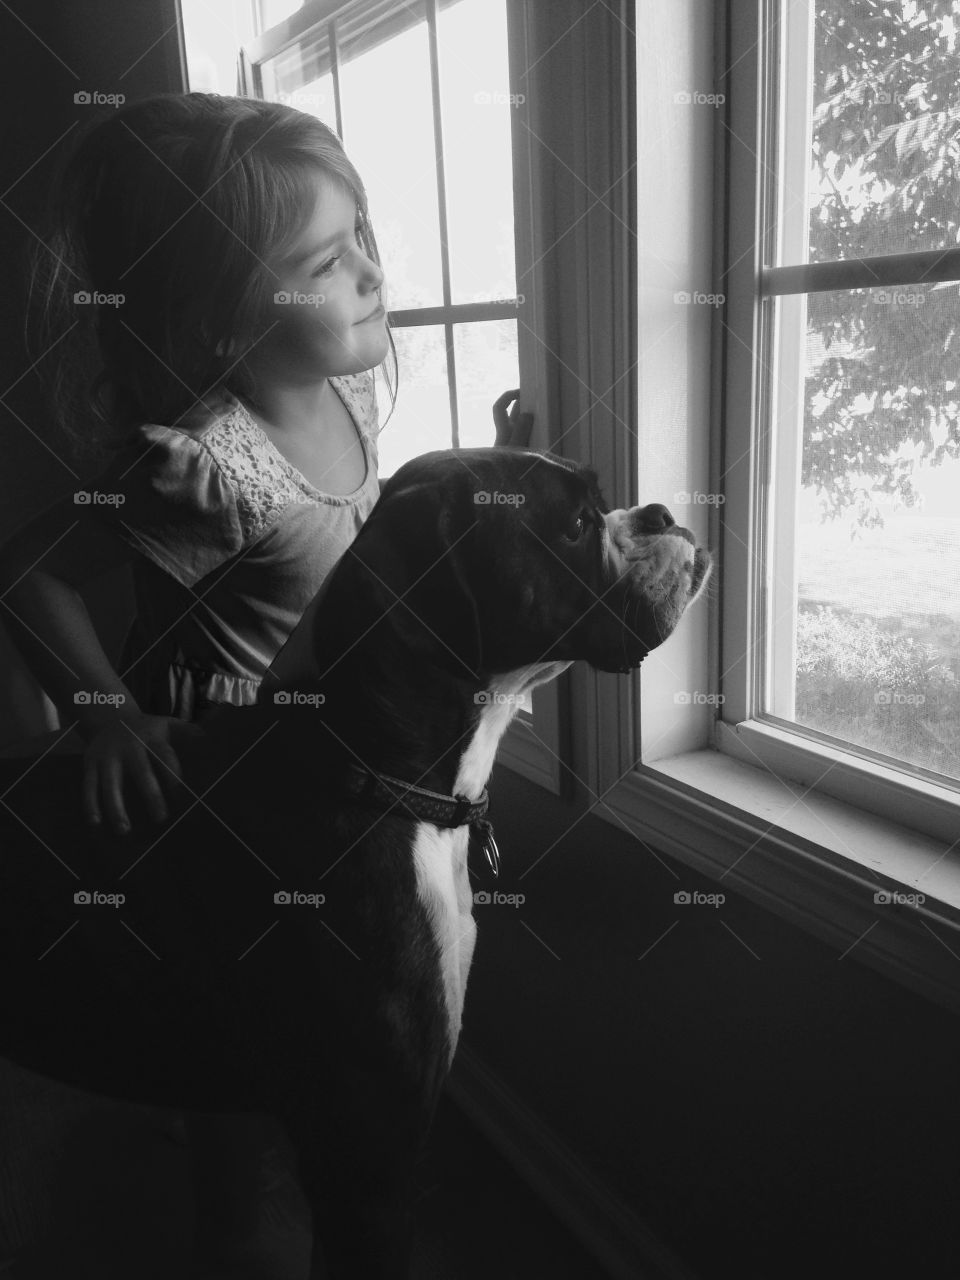 Little girl with dog looking through the window